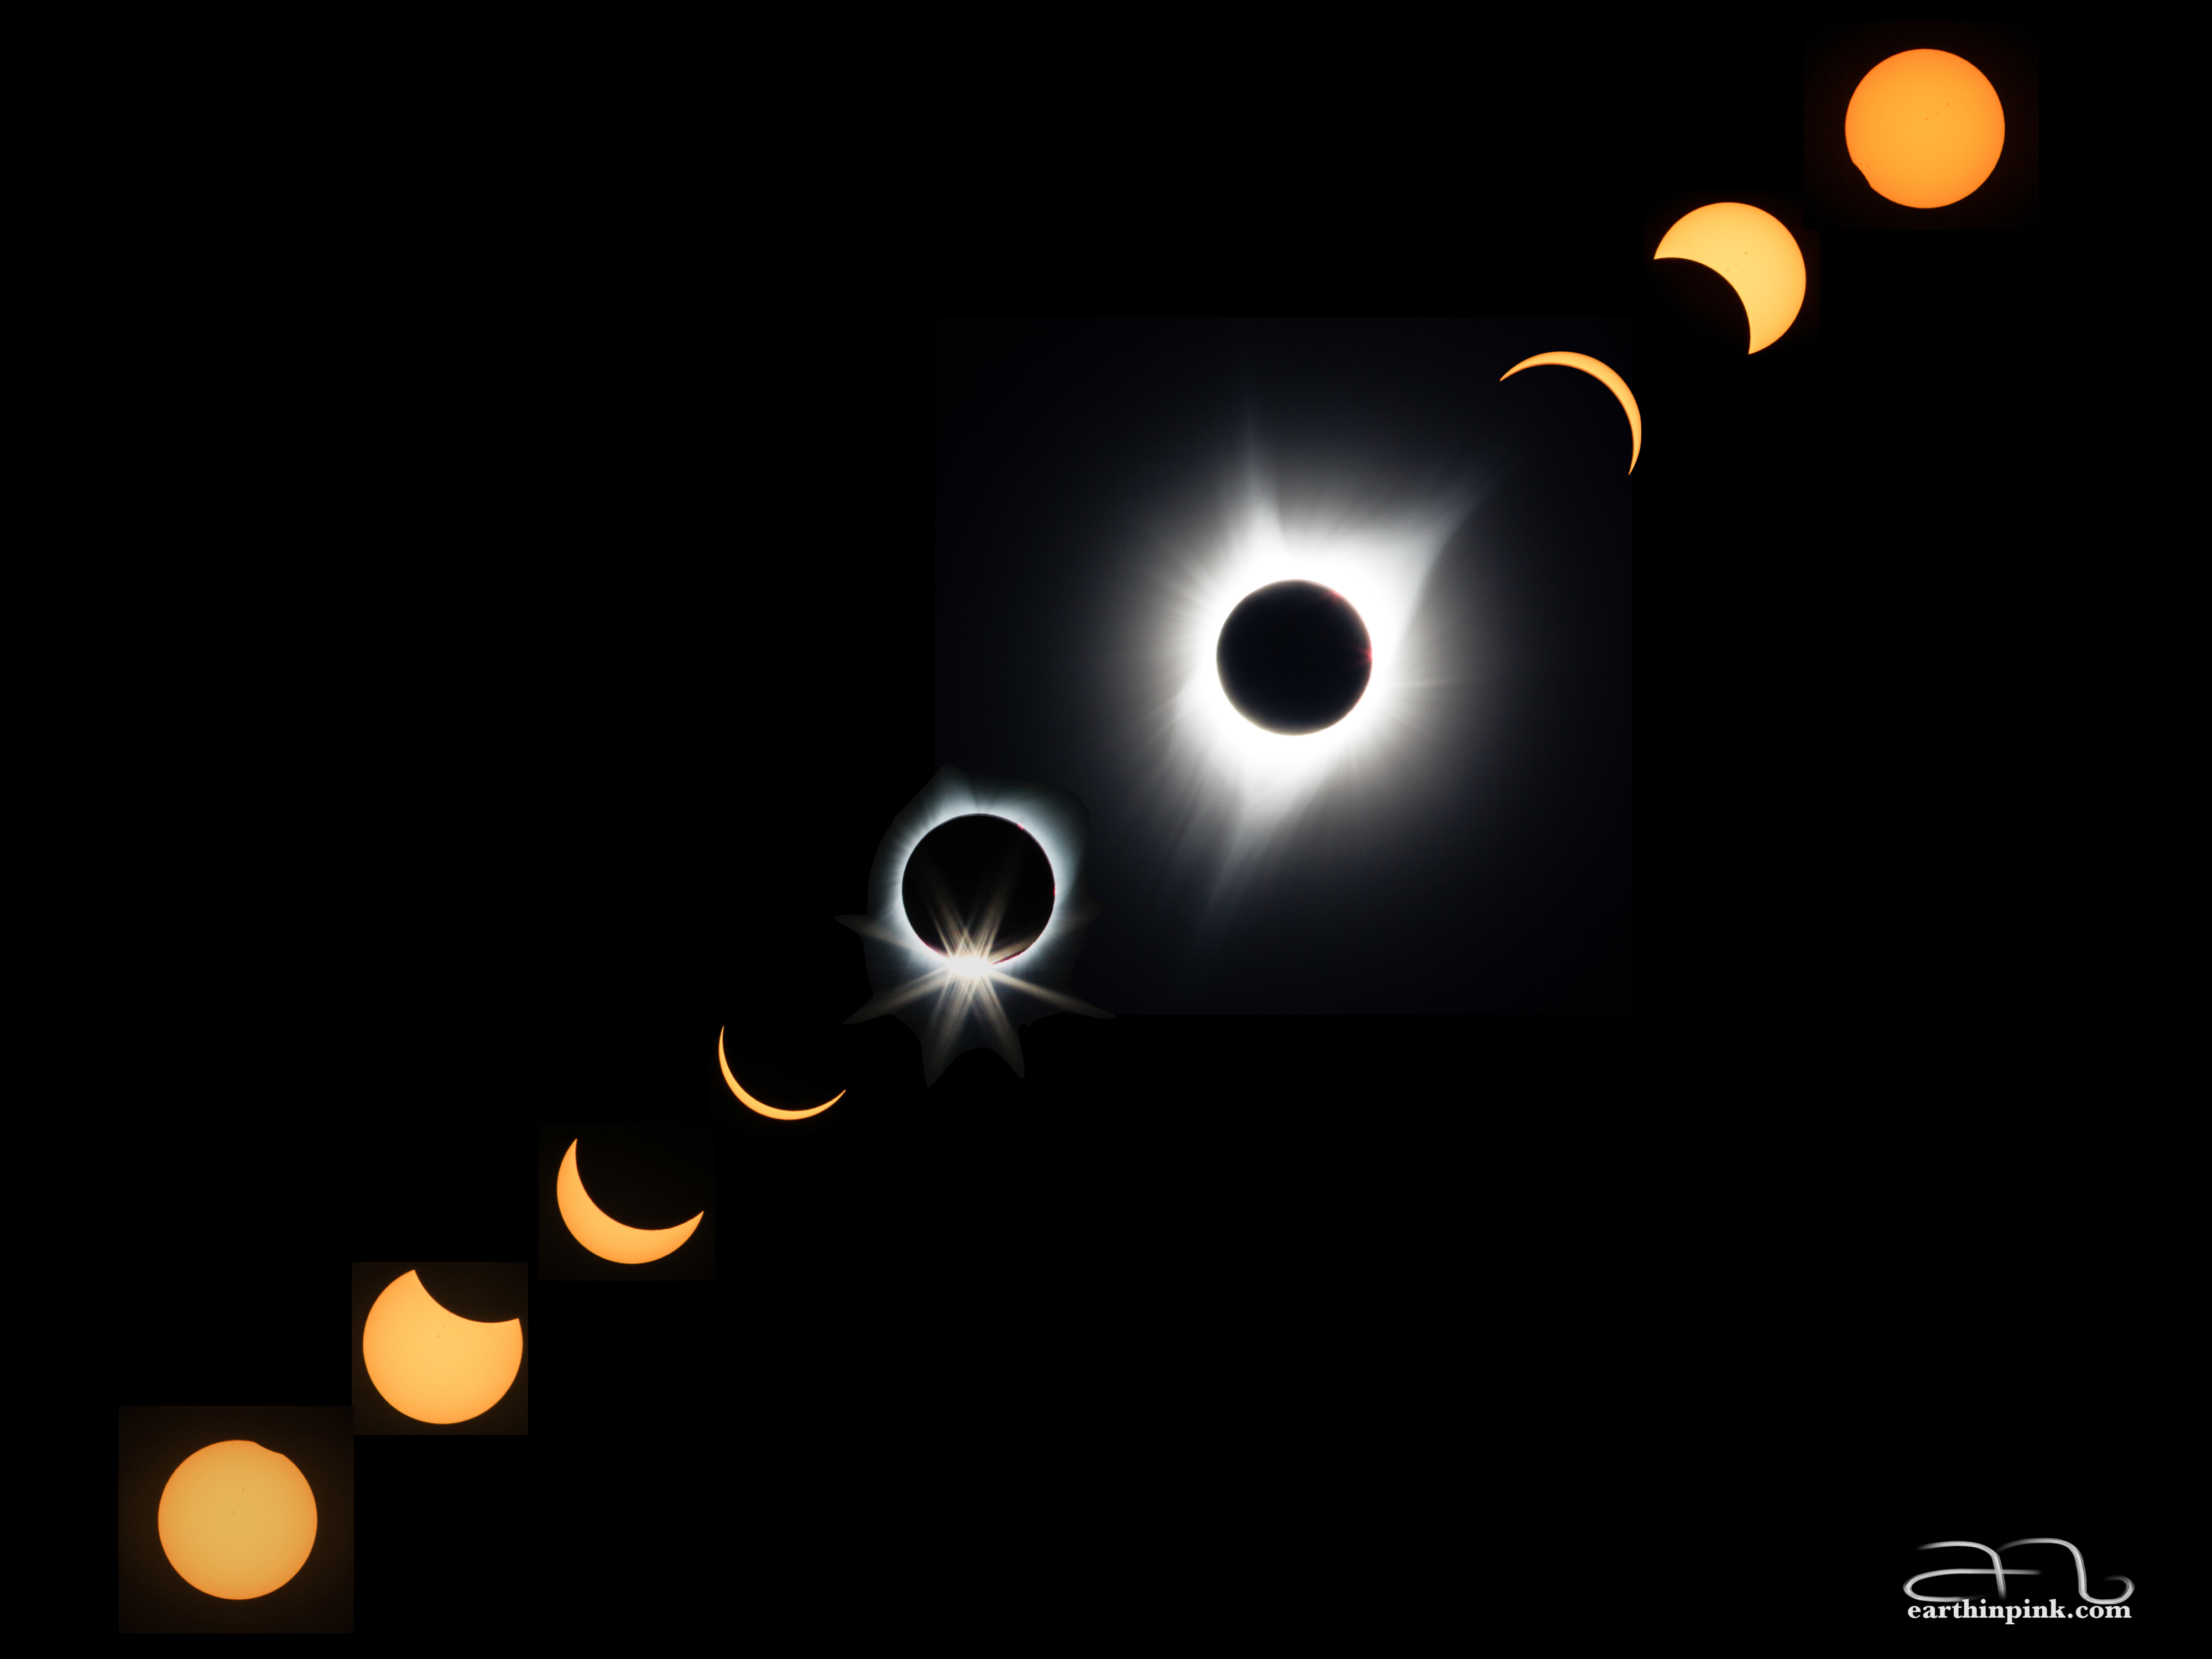 Time series combining 9 photos taken at different stages of the eclipse.